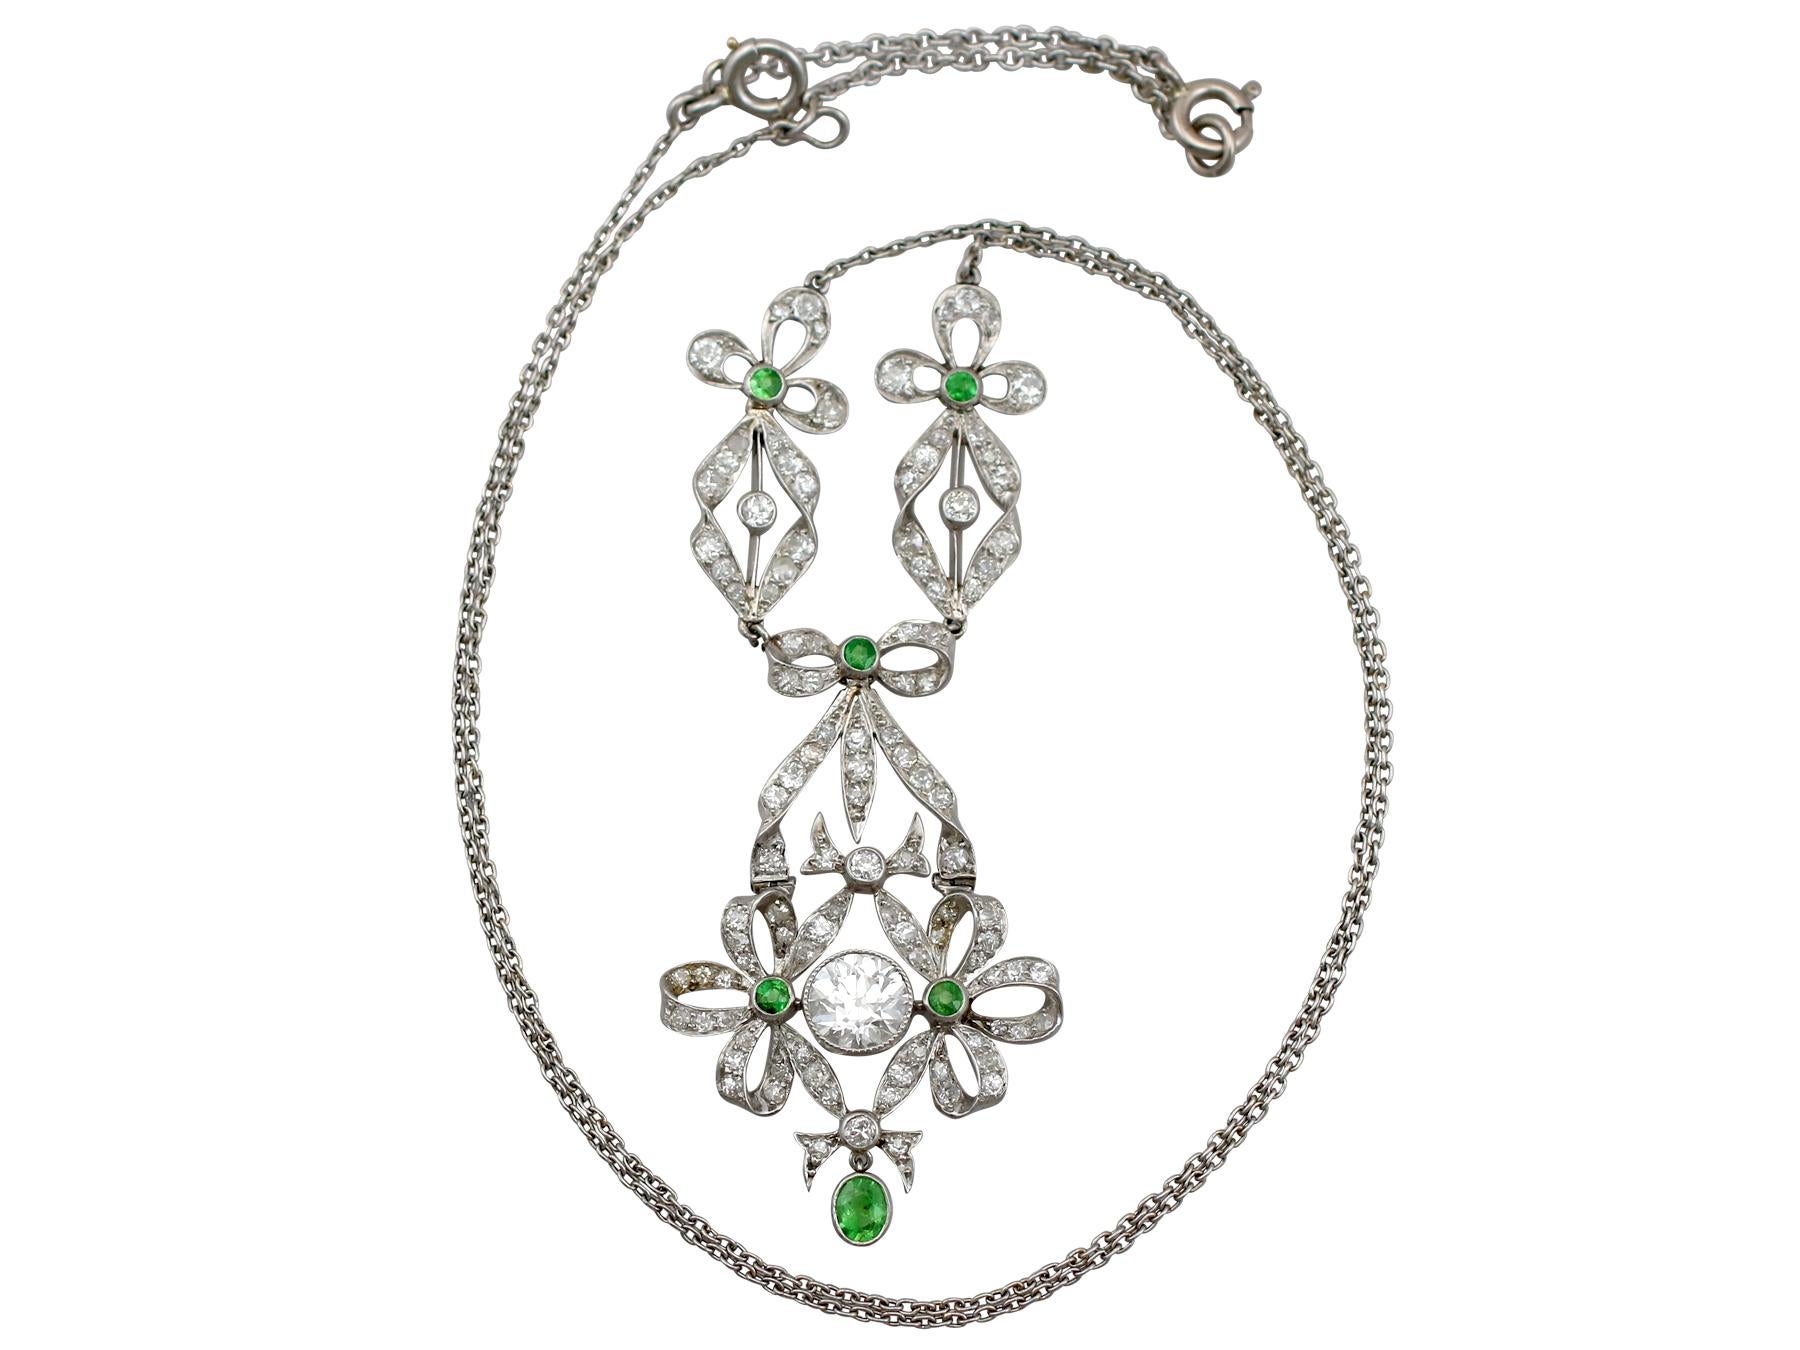 A stunning, fine and impressive antique 2.53 carat diamond and 0.15 carat peridot, platinum pendant; part of our diverse antique jewelry and estate jewelry collections.

This stunning, fine and impressive antique peridot pendant has been crafted in